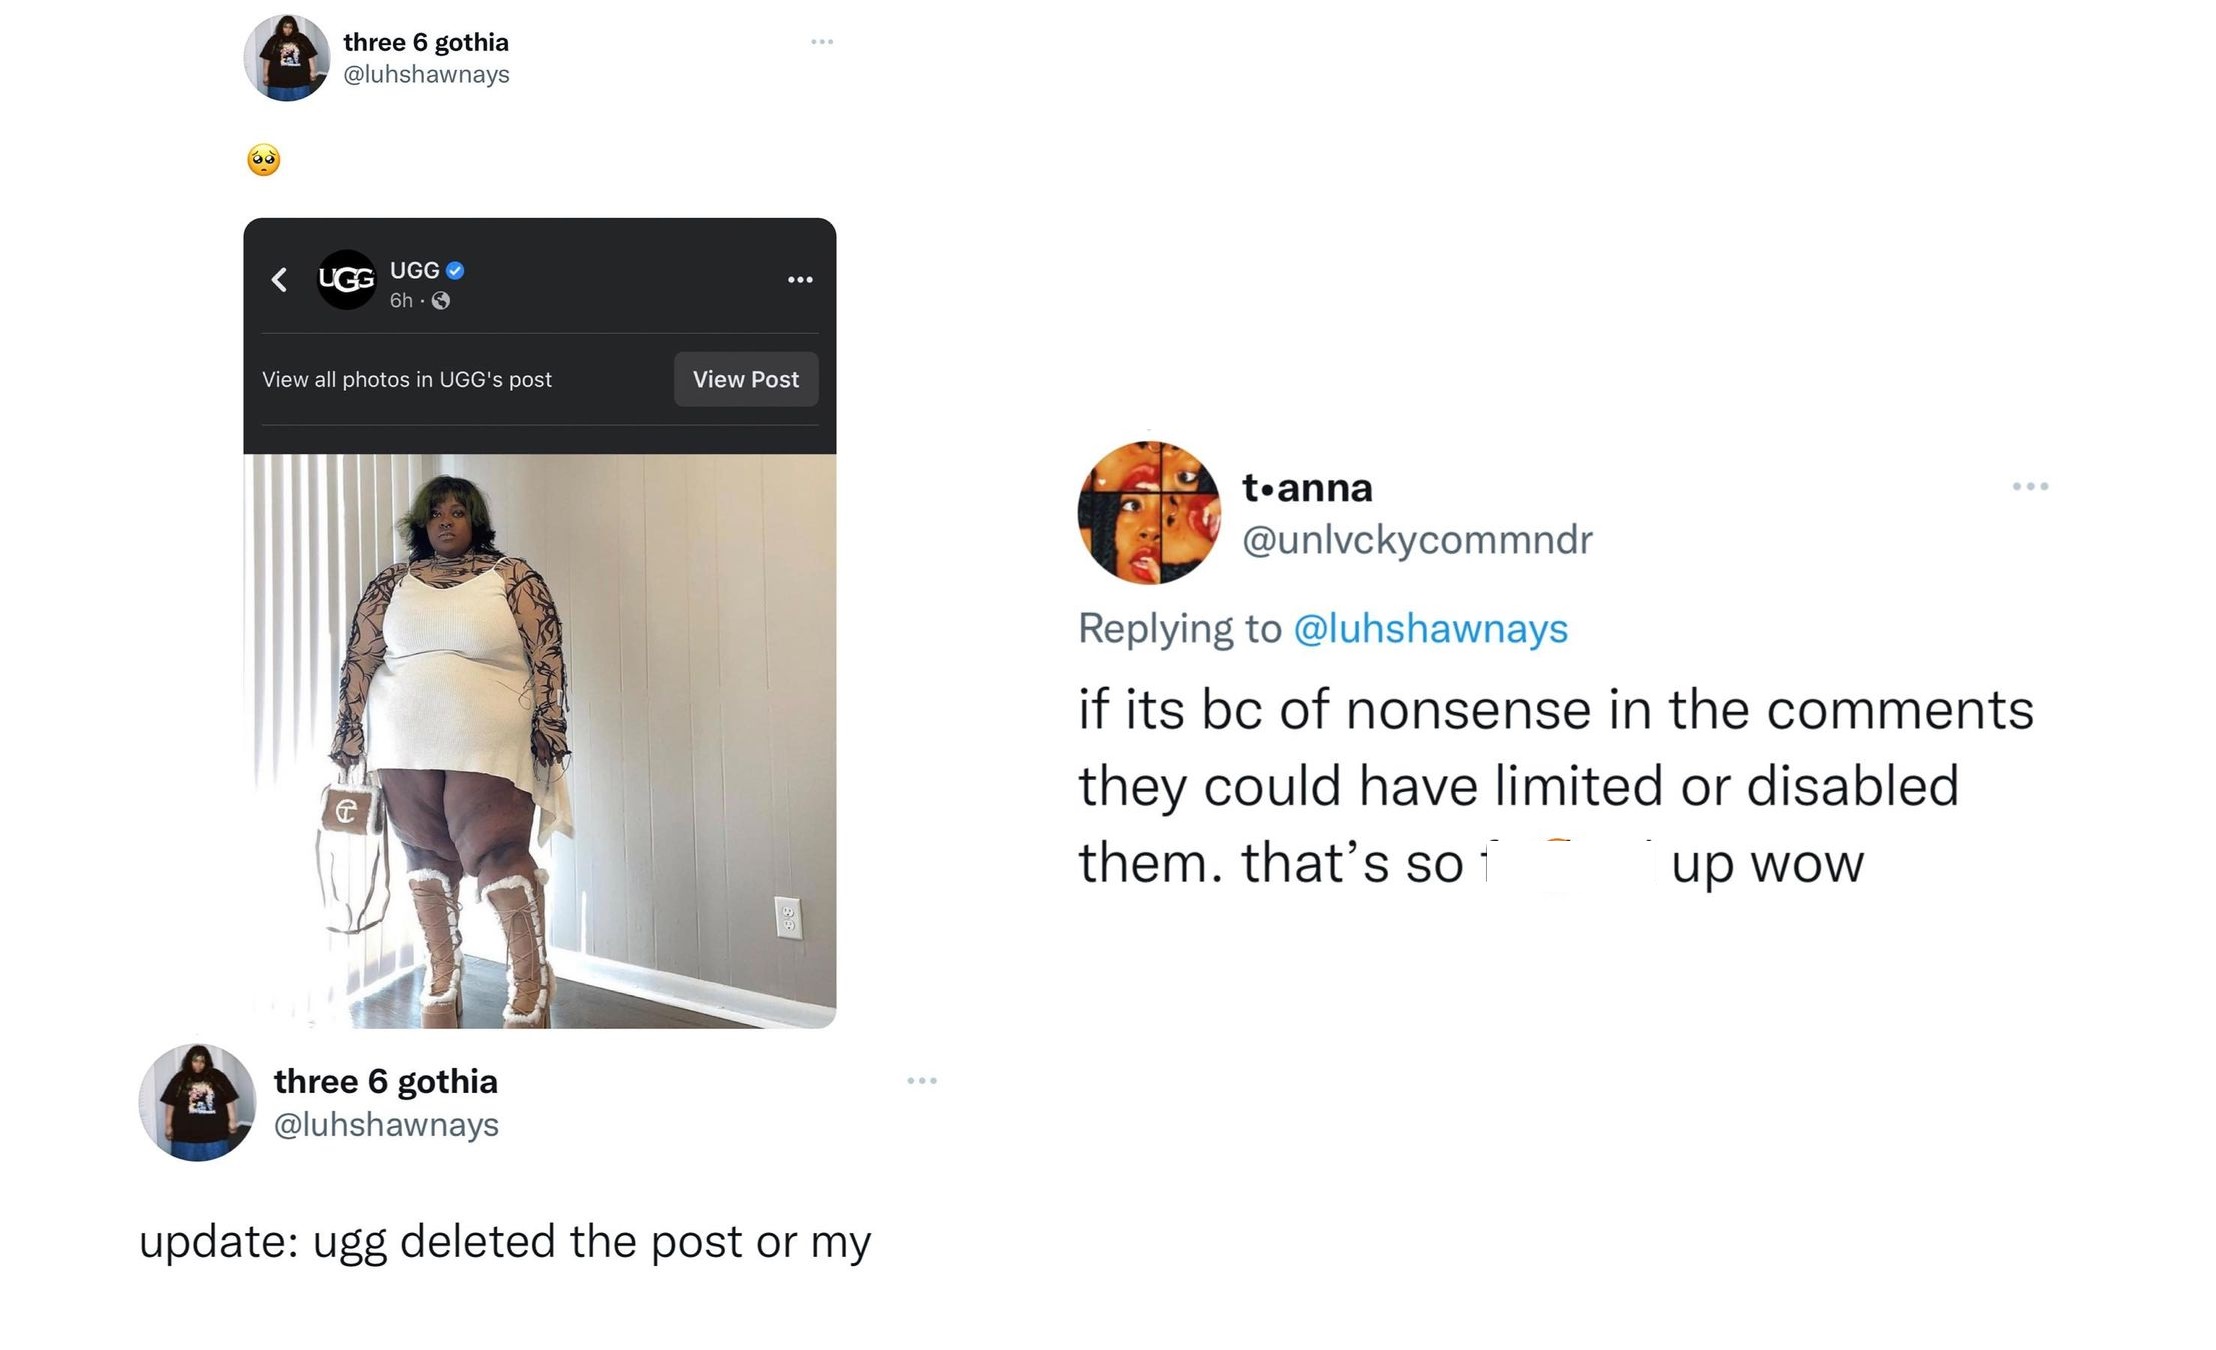 UGG took down pic of plus-sized black woman due to Facebook bullying